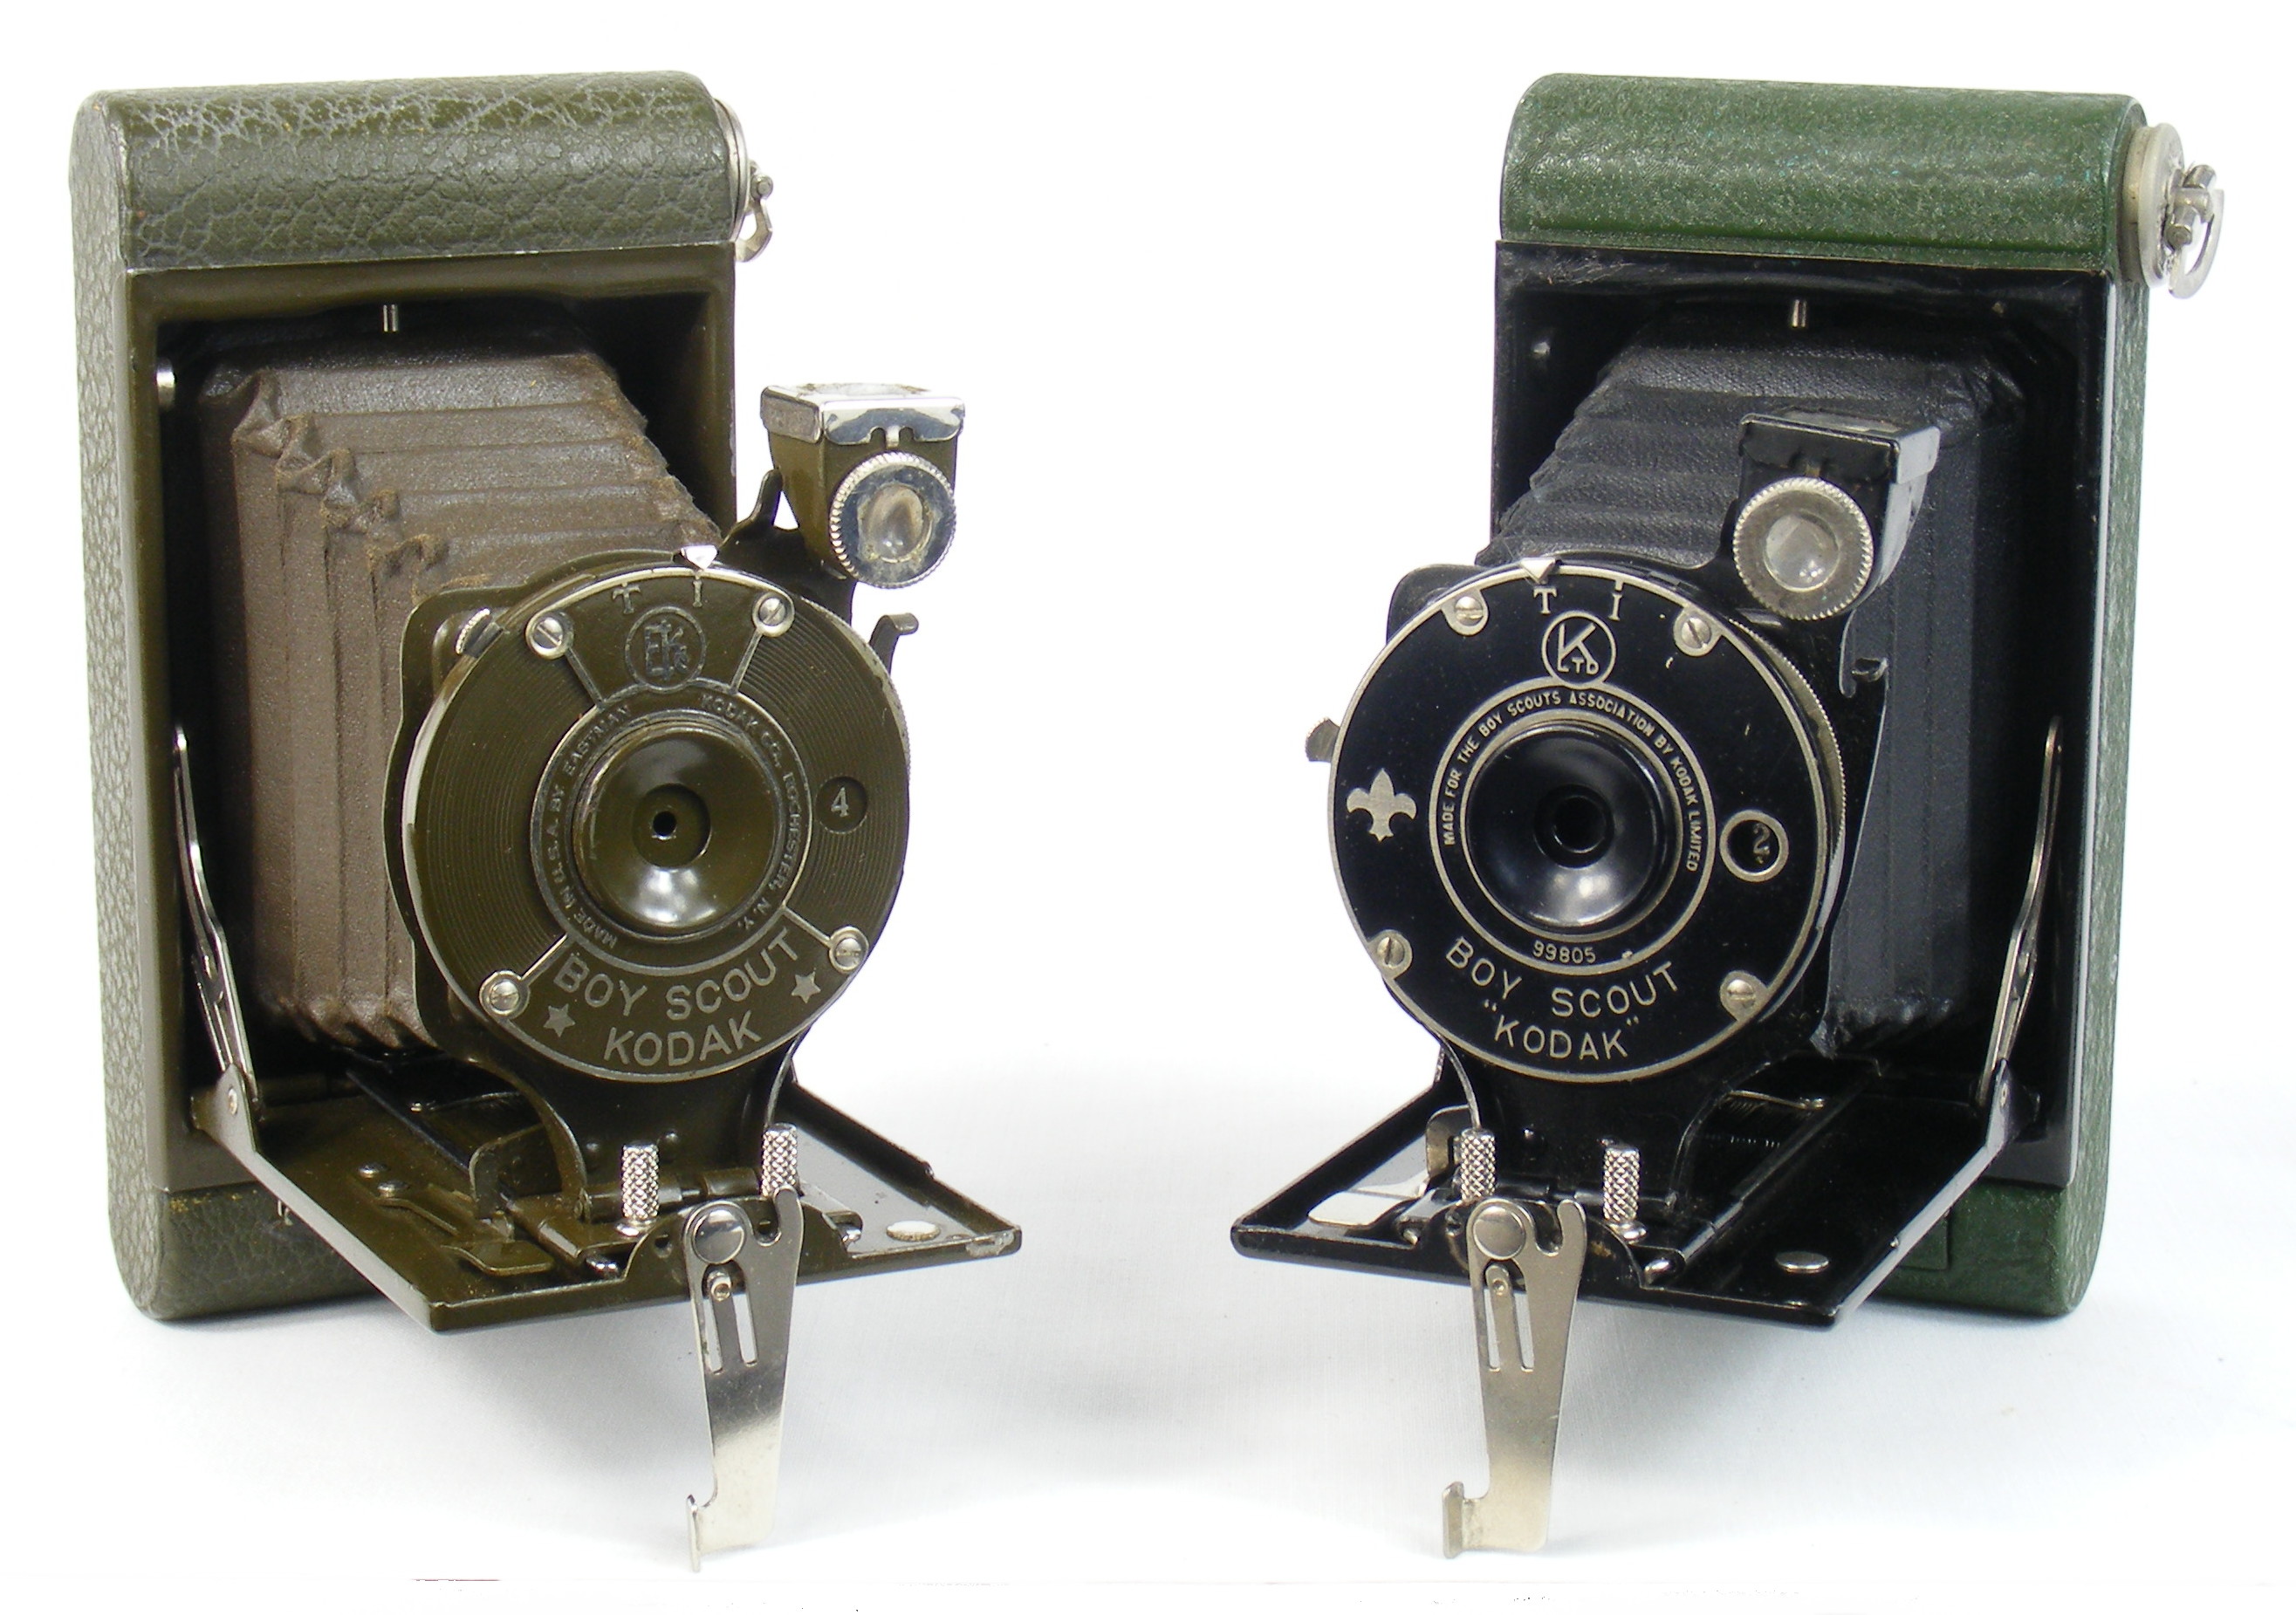 Image of Boy Scout Kodak cameras (US and UK versions)